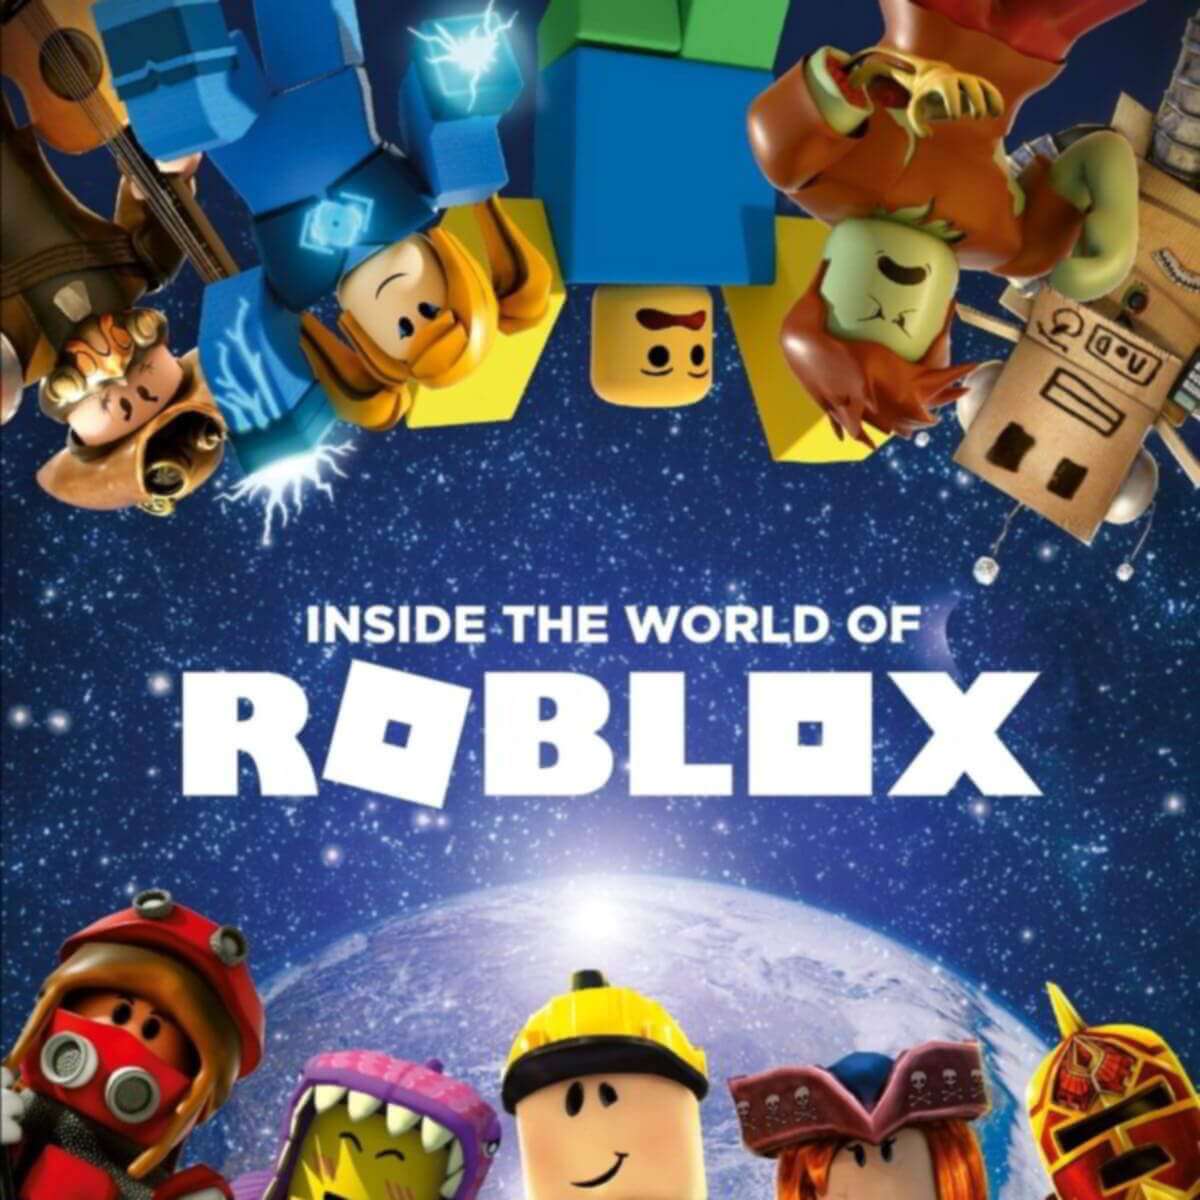 How To Fix Request Problems In Roblox Fixed By Experts